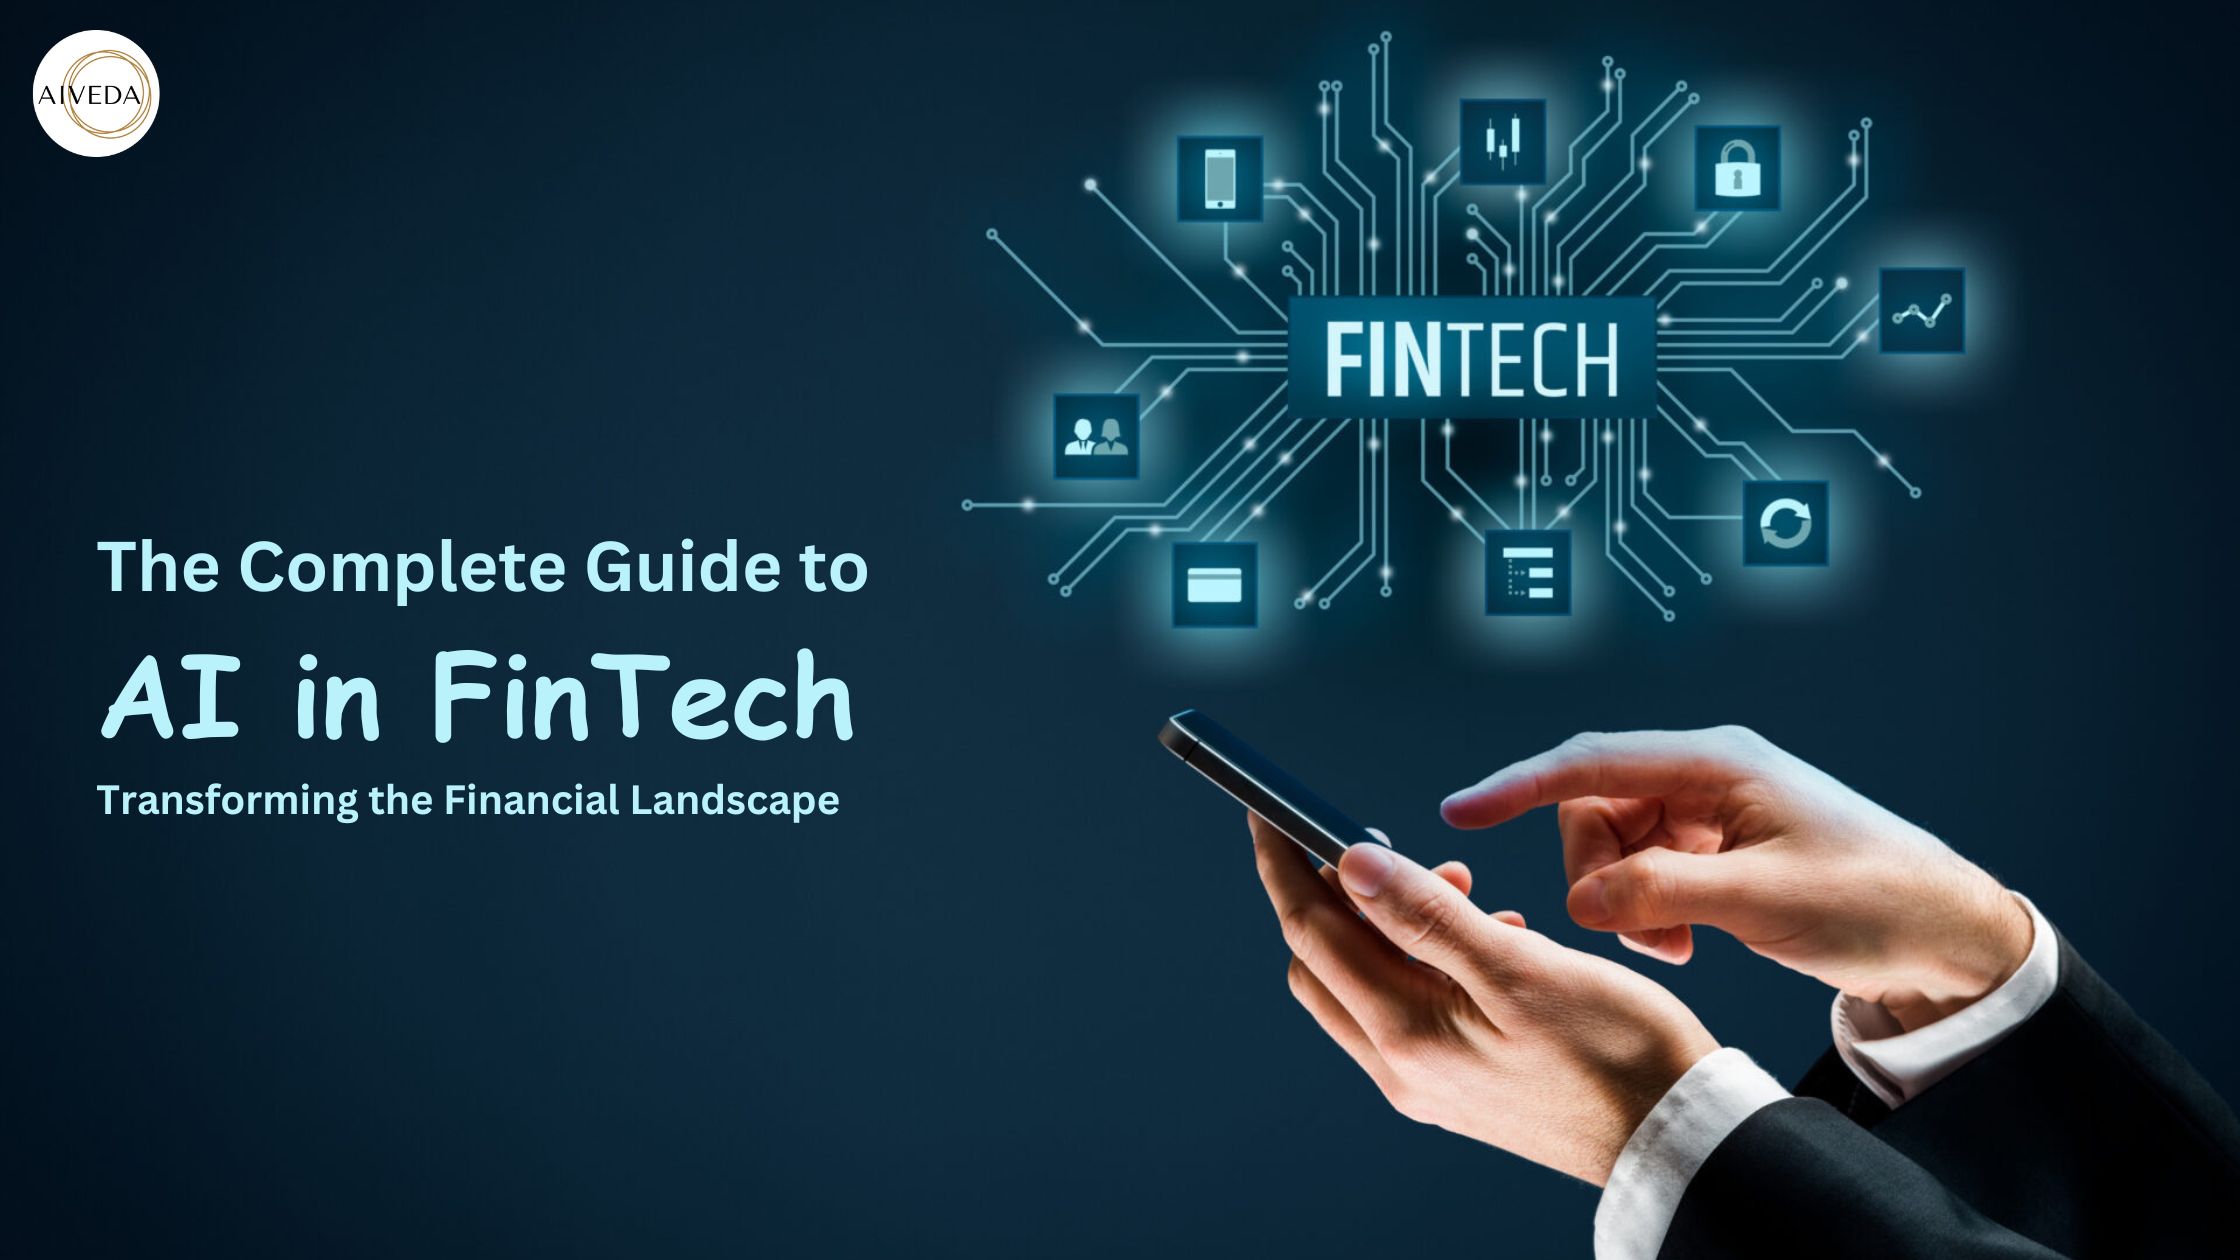 The Complete Guide to AI in FinTech: Transforming the Financial Landscape - AIVeda